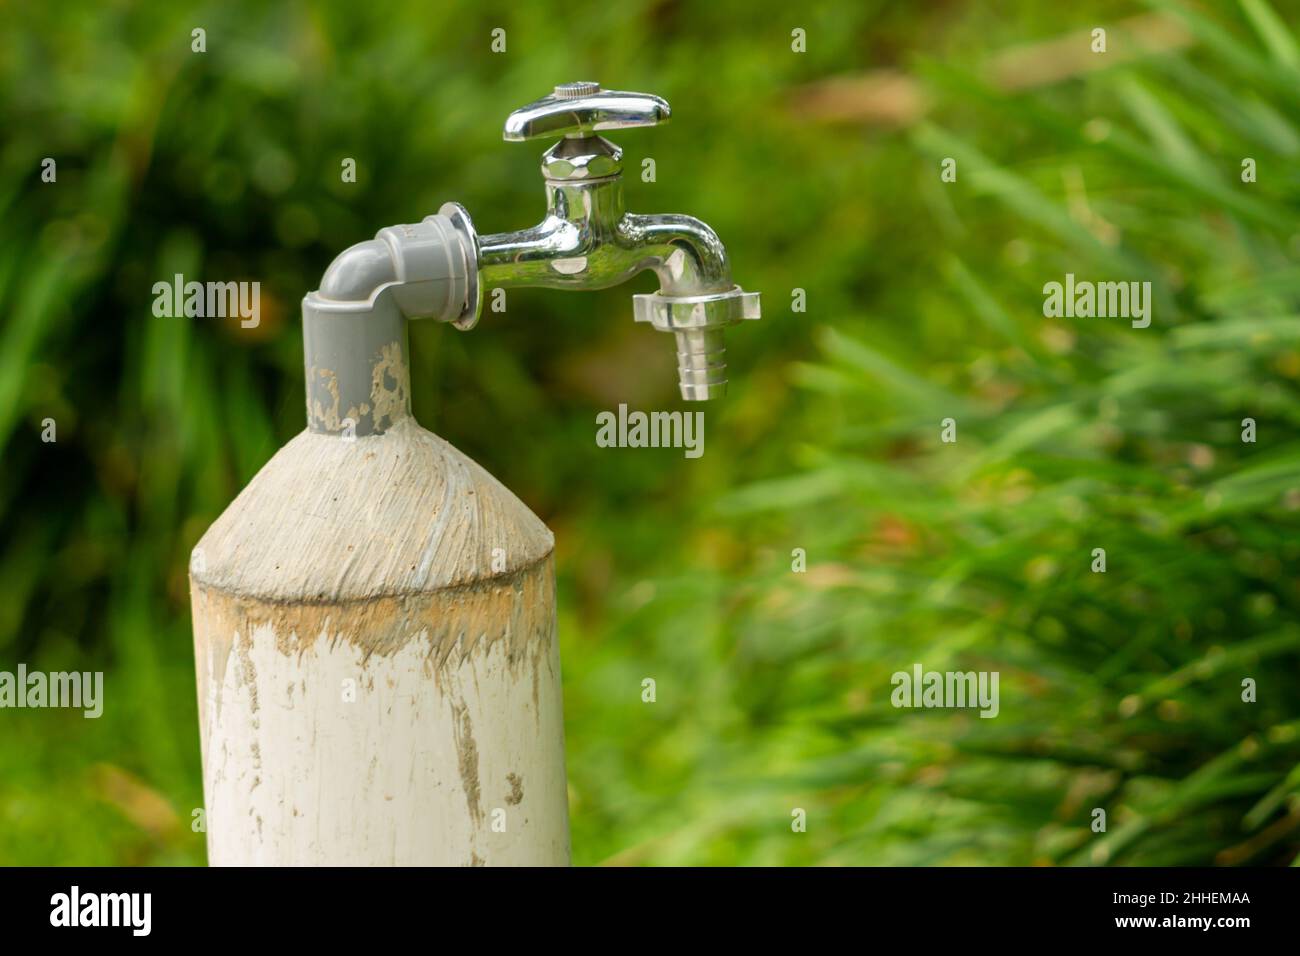 A metal water faucet is in a garden, used for washing hands, which is a basic need during the covid-19 pandemic Stock Photo